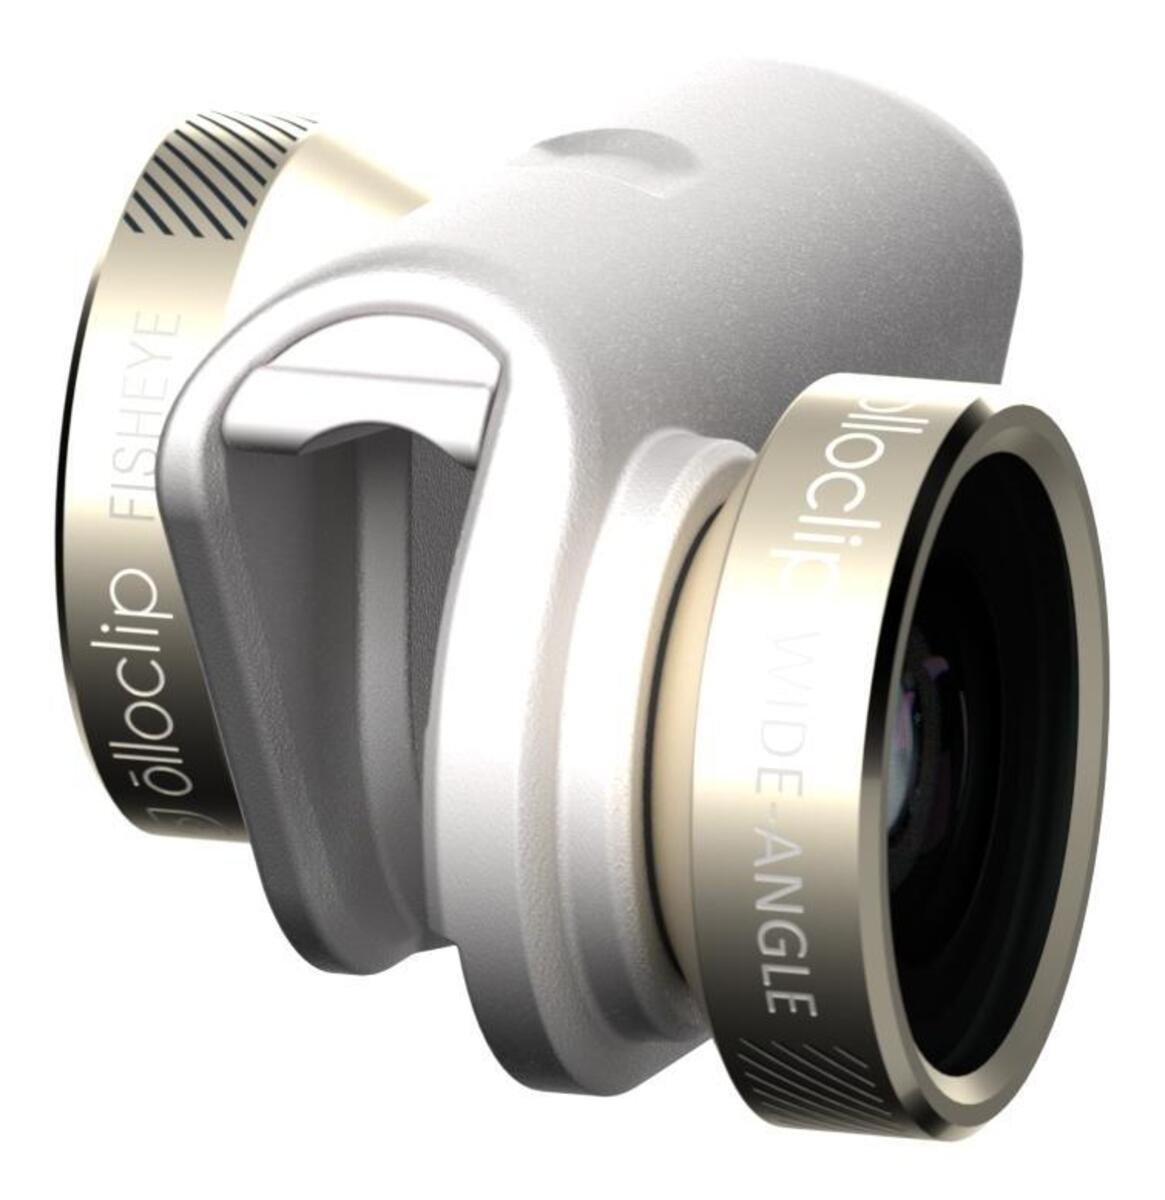 OLLOCLIP 4-IN-1 Lens With Pendant-Gold Lens/White Clip - For iPhone 6/6PLUS